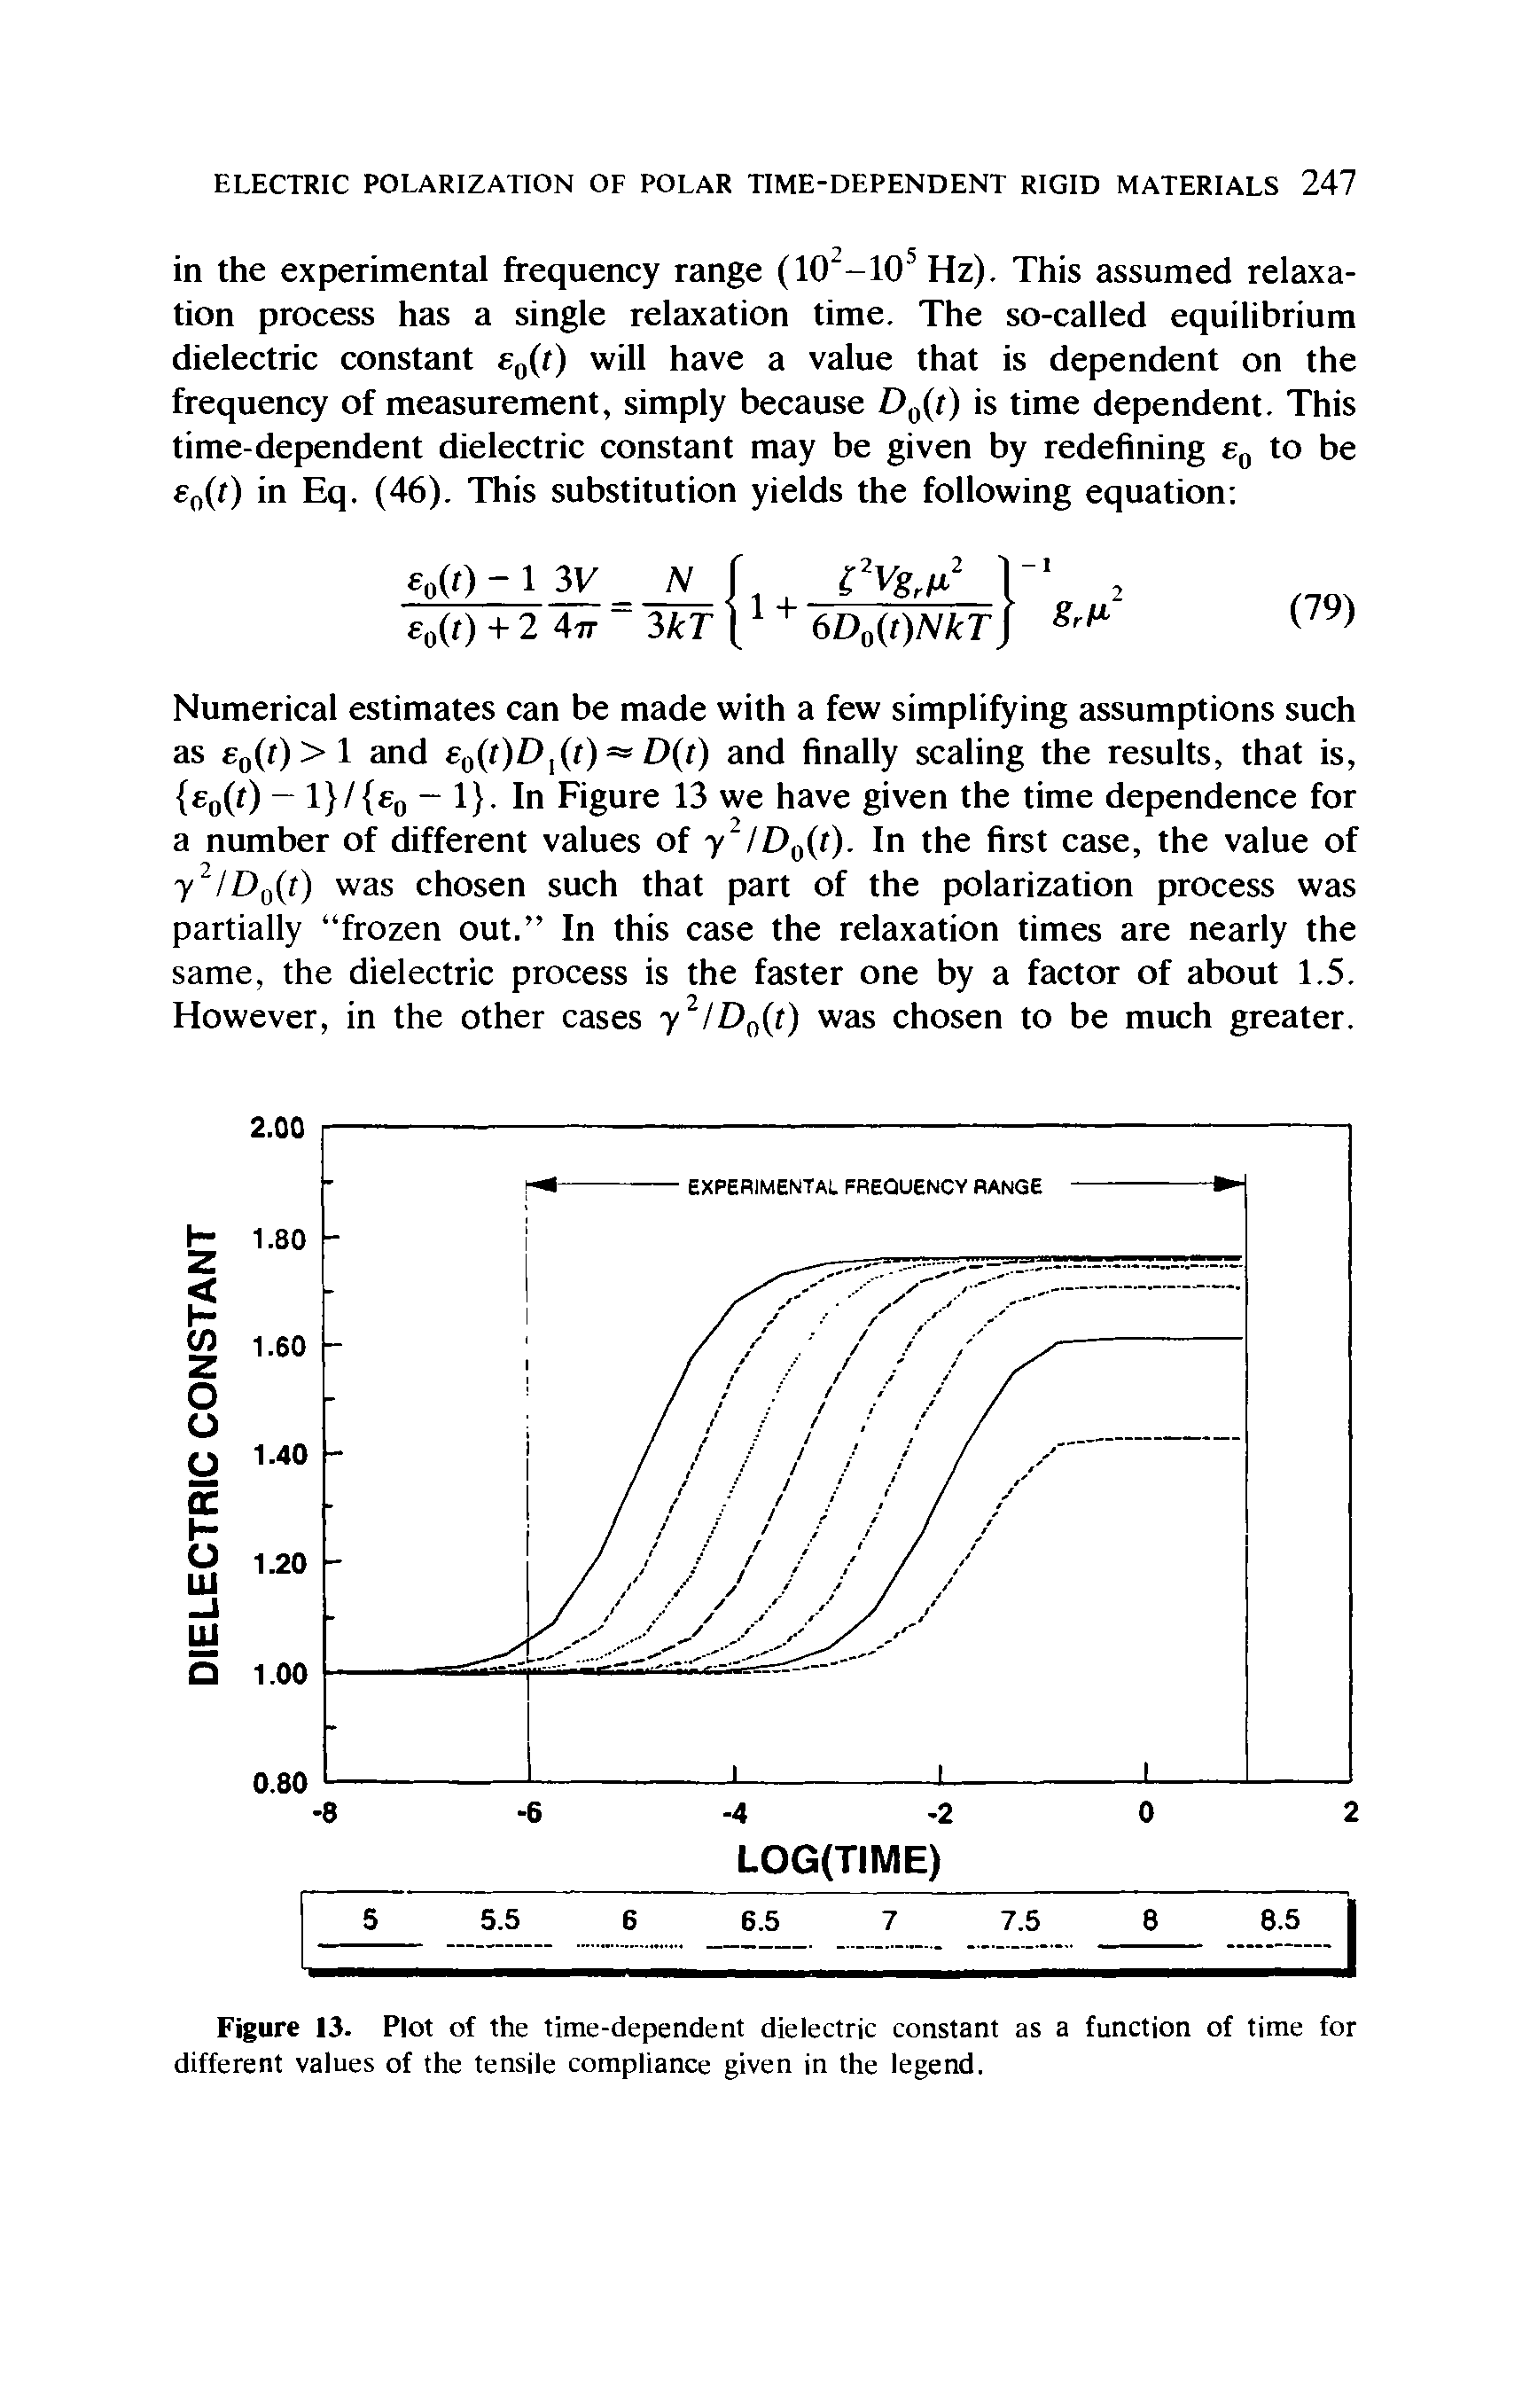 Figure 13. Plot of the time-dependent dielectric constant as a function of time for different values of the tensile compliance given in the legend.